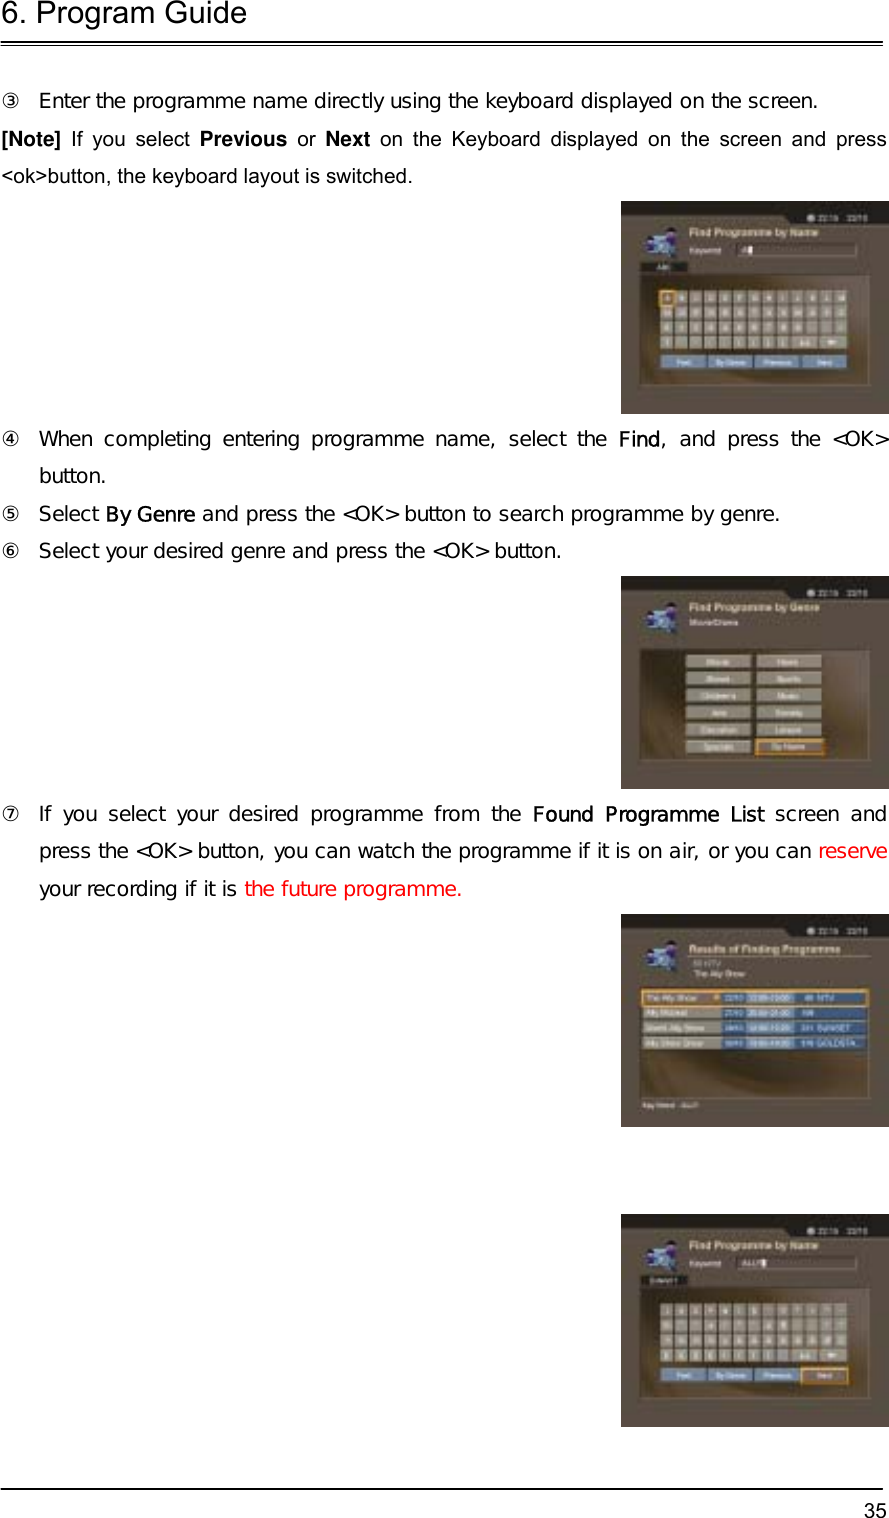 6. Program Guide  35③  Enter the programme name directly using the keyboard displayed on the screen.  [Note] If you select Previous or Next on the Keyboard displayed on the screen and press &lt;ok&gt;button, the keyboard layout is switched.  ④  When completing entering programme name, select the Find, and press the &lt;OK&gt; button. ⑤ Select By Genre and press the &lt;OK&gt; button to search programme by genre. ⑥  Select your desired genre and press the &lt;OK&gt; button.  ⑦  If you select your desired programme from the Found Programme List screen and press the &lt;OK&gt; button, you can watch the programme if it is on air, or you can reserve your recording if it is the future programme.     